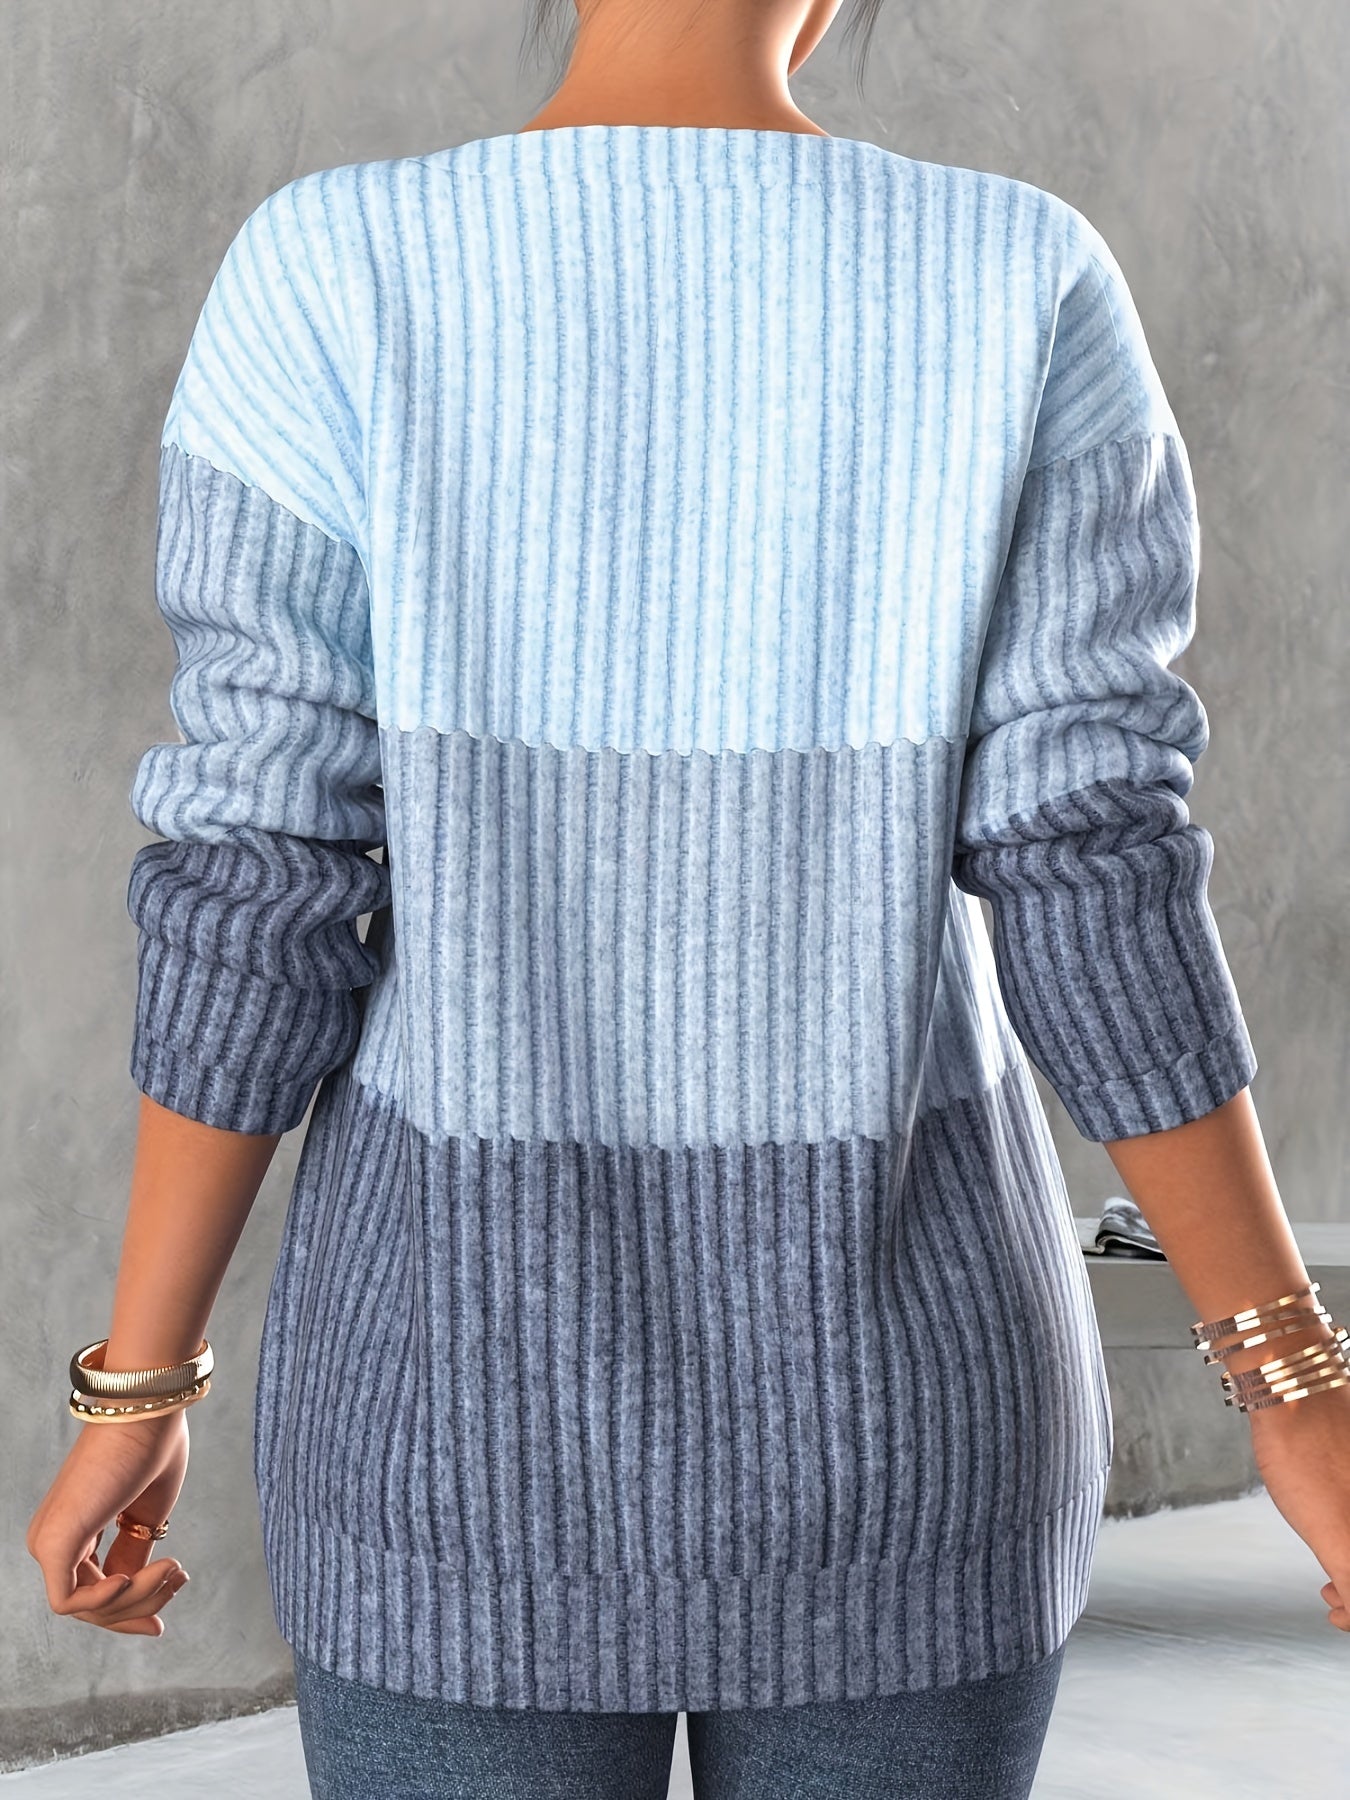 Plus Size Casual Sweatshirt, Women's Plus Colorblock Ribbed Knit Half Zipper Long Sleeve Round Neck Pullover Top